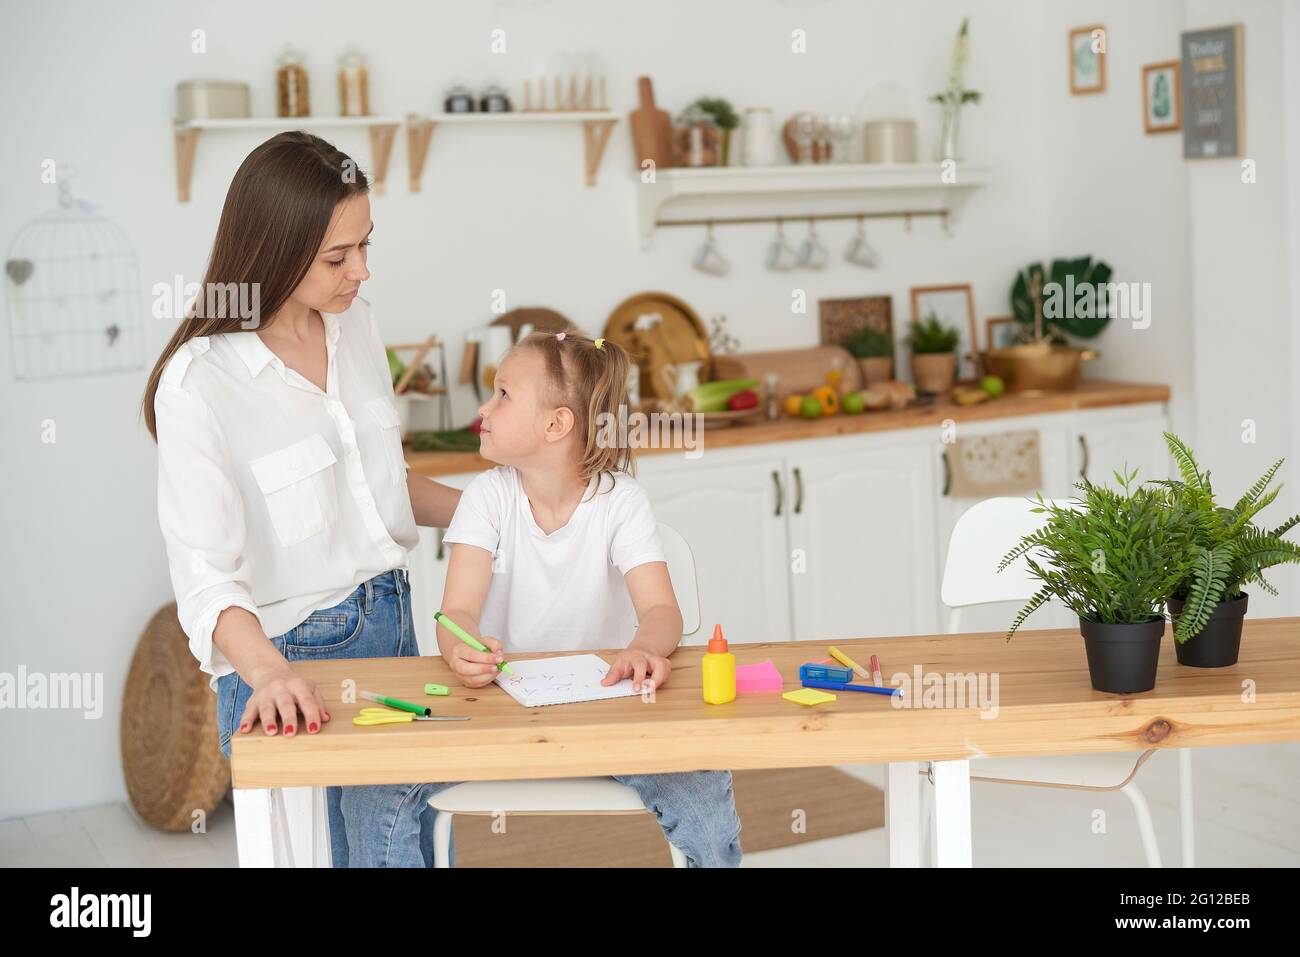 Tutor and child doing homework at kitchen. Mom and daughter are trying to solve the task. They are in a good mood and smile. Stock Photo